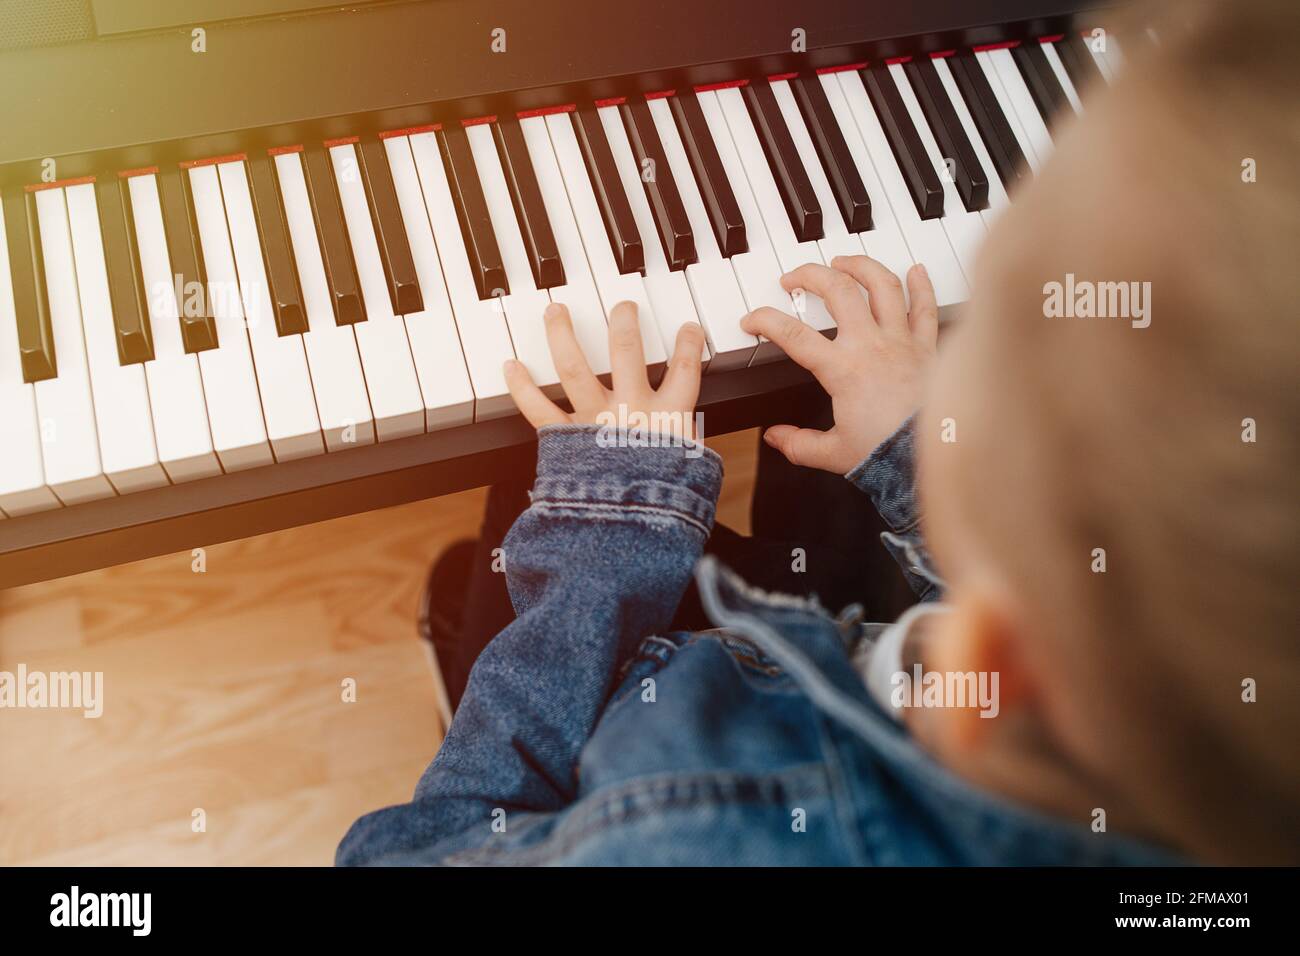 Little boy playing electric piano at home, sun is hitting keyboard. He is wearing jeans jacket, his blond hair in a bun. Blurred, high angle, close up Stock Photo